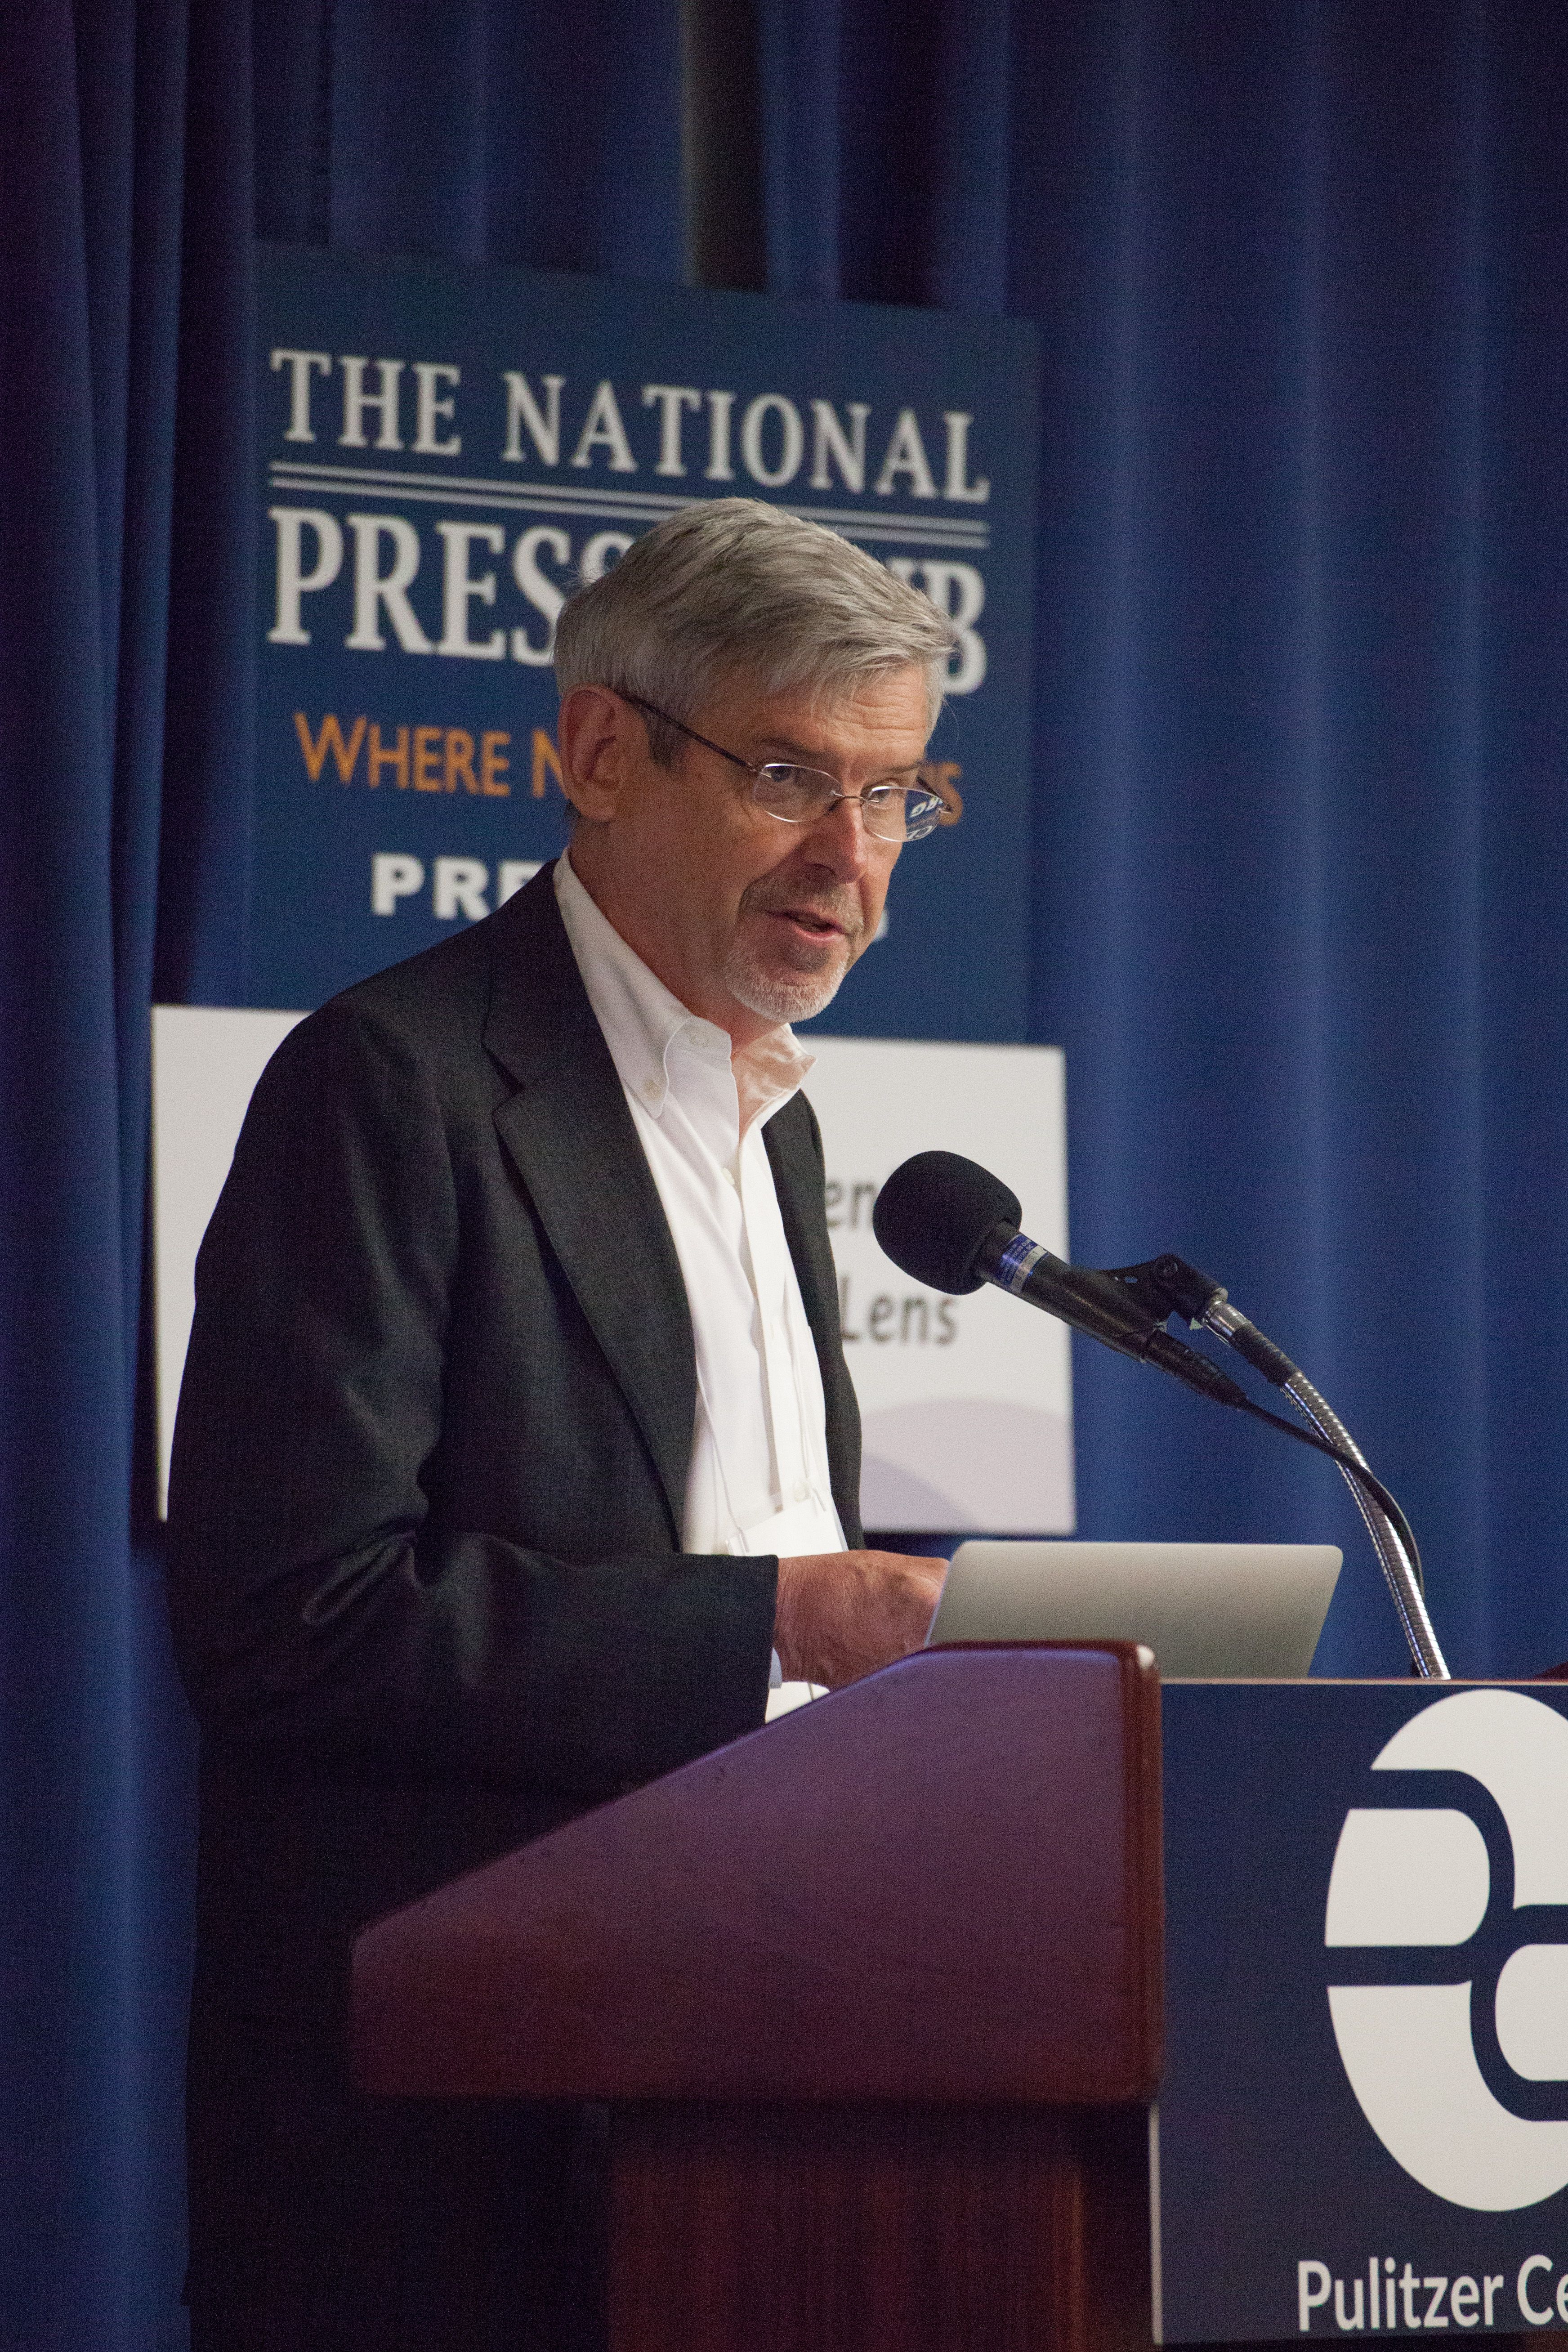 Pulitzer Center senior editor Tom Hundley speaks to the challenging nature of conflict reporting—especially for female journalists. Image by Sydney Combs. United States, 2017.